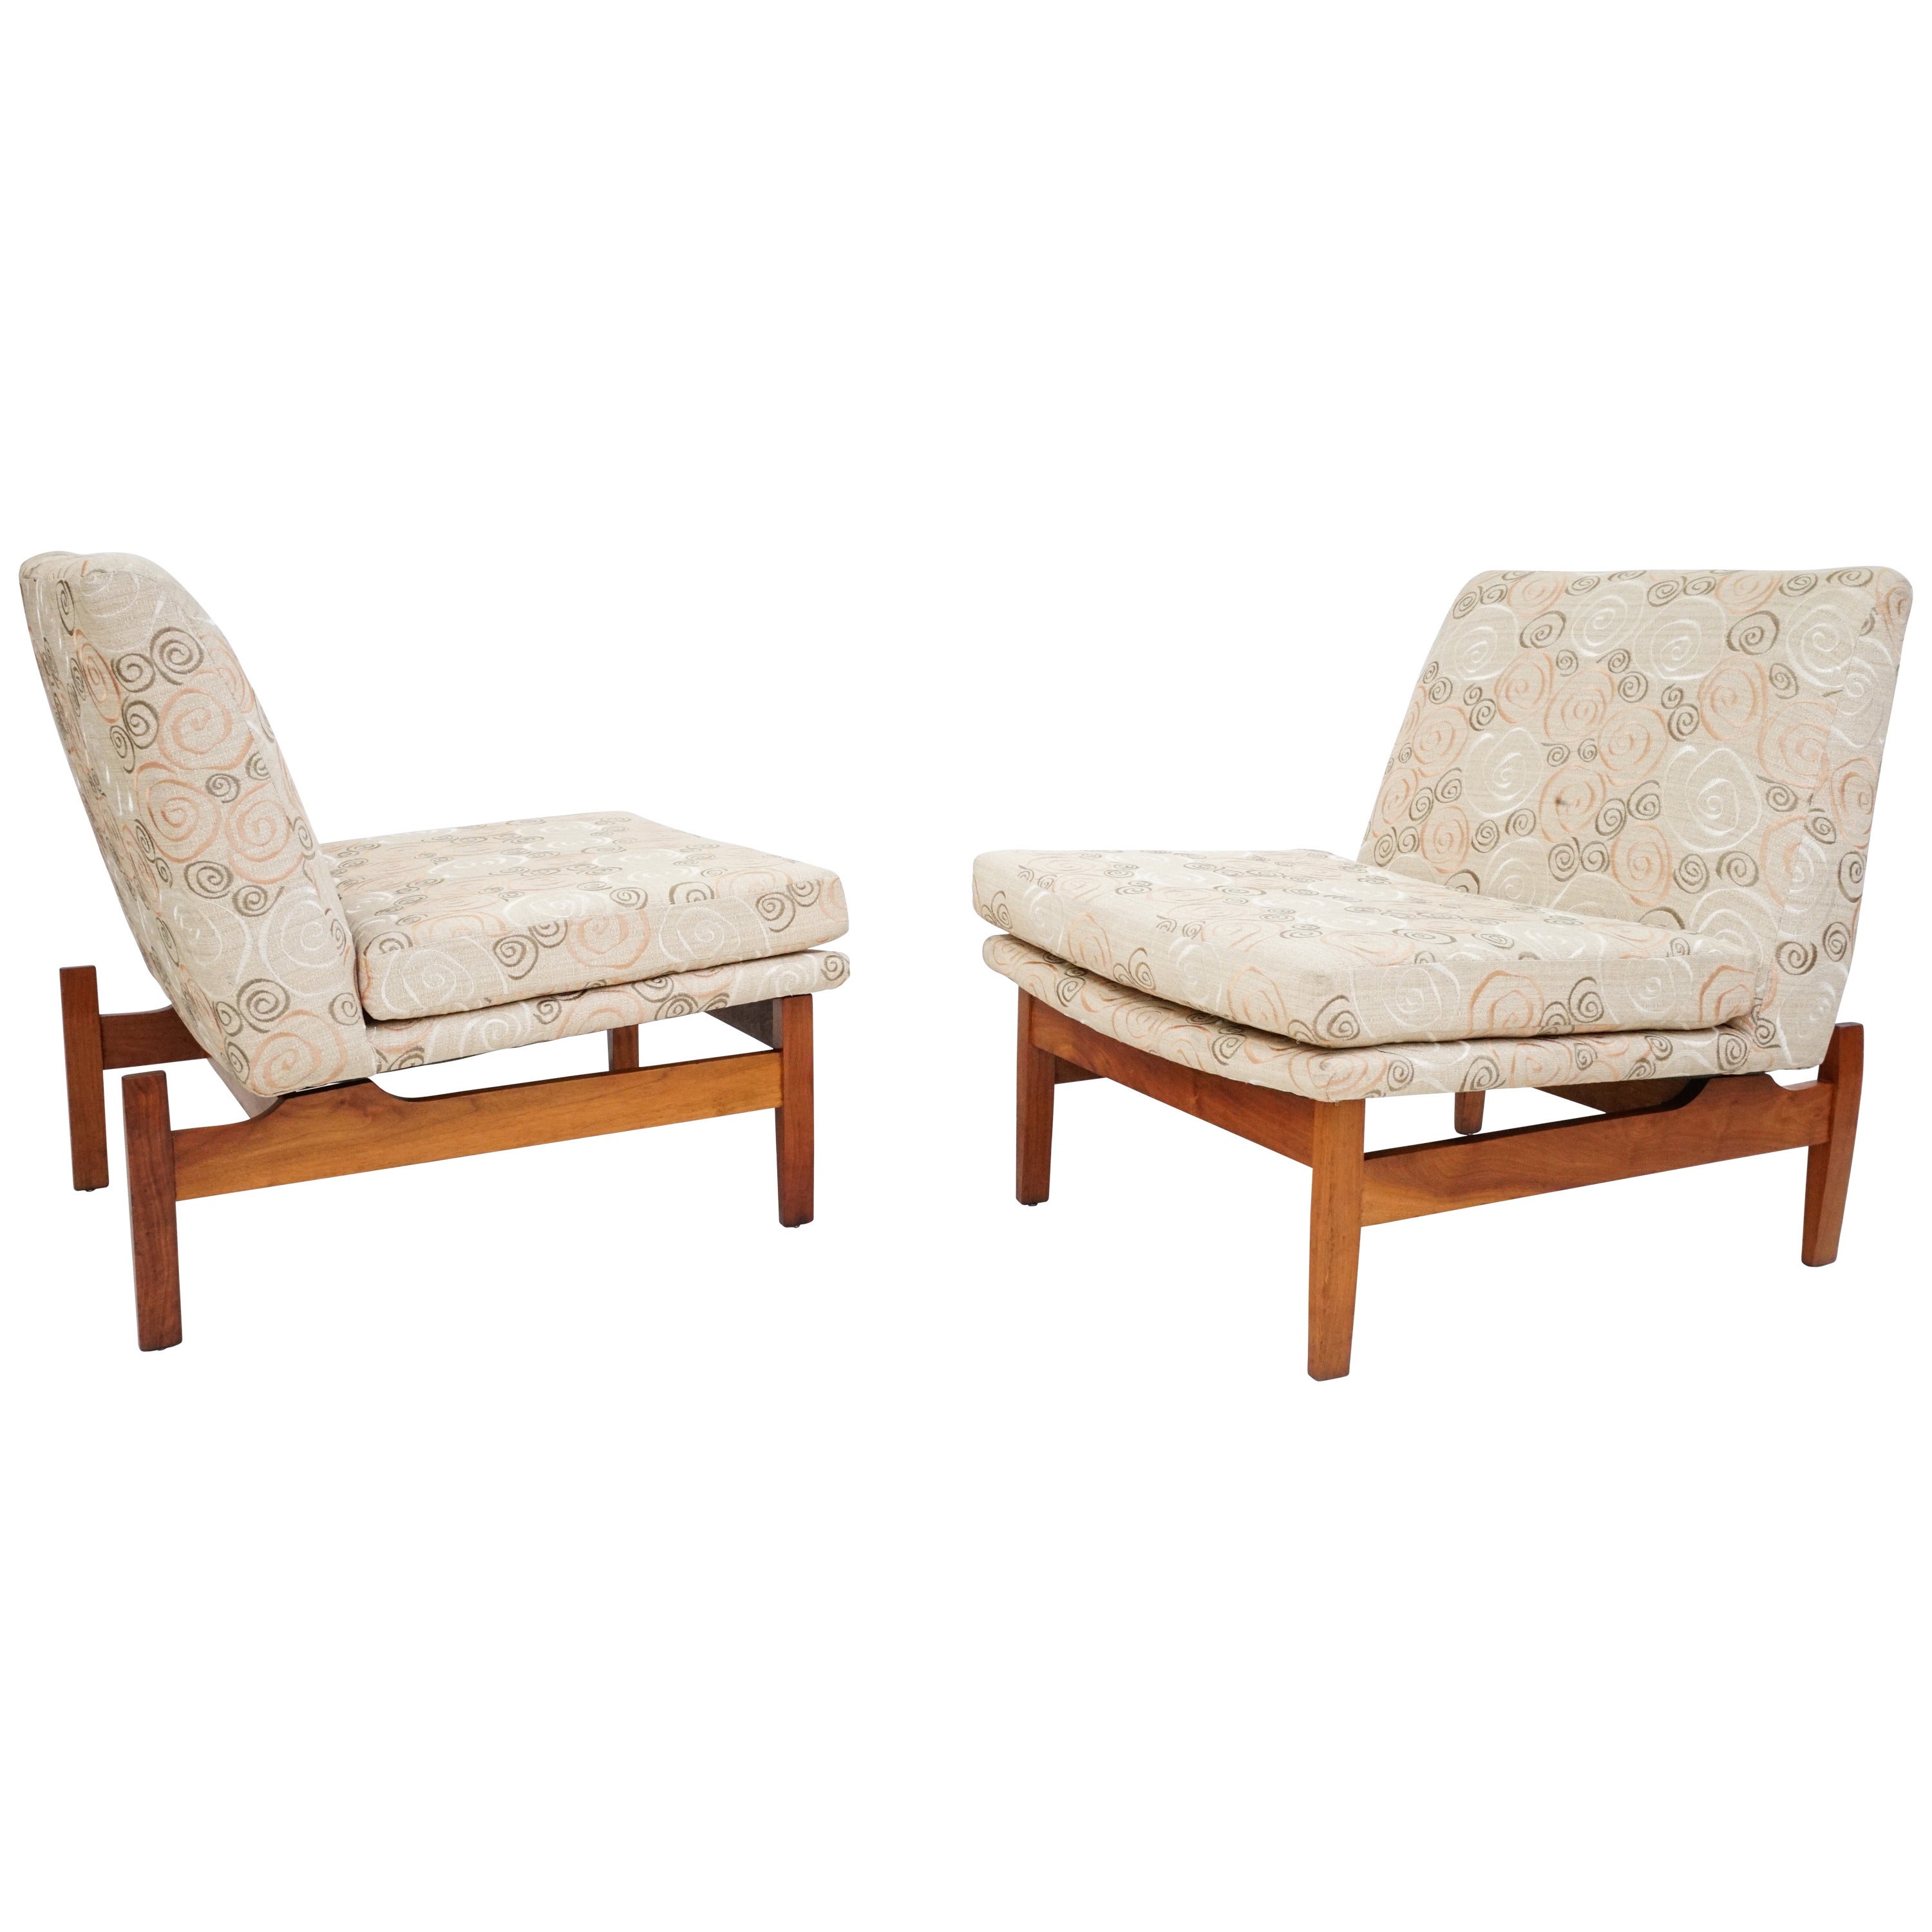 Mid-Century Modern Floating Slipper Chairs by Jens Risom For Sale